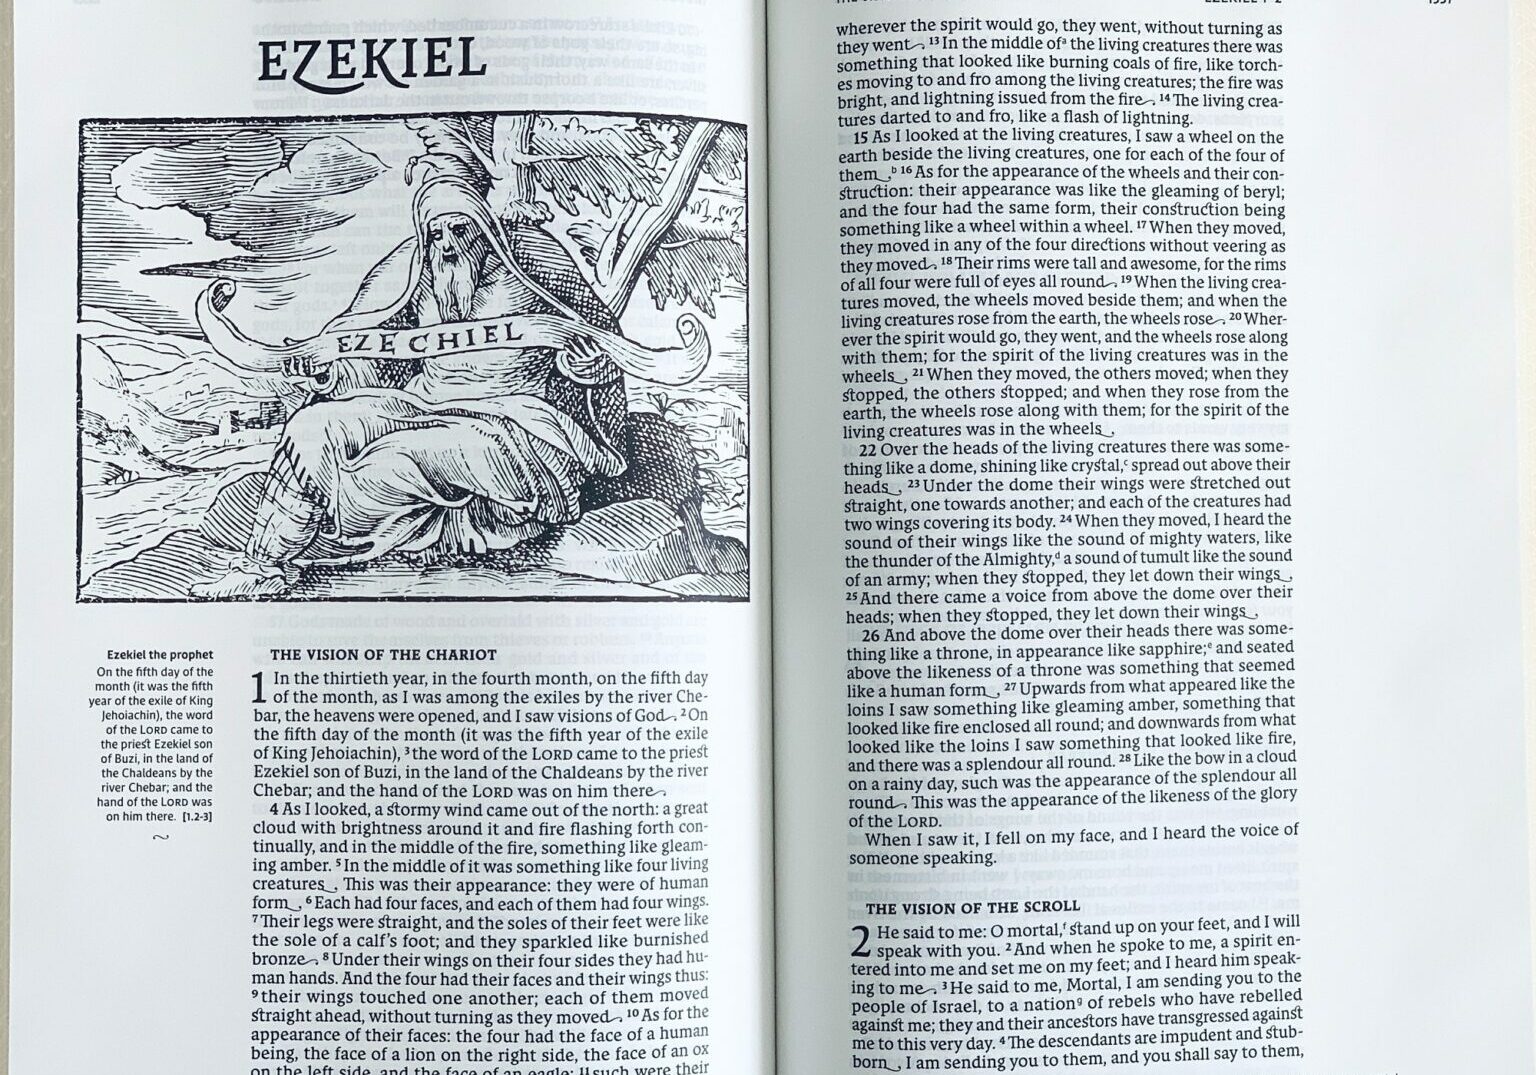 A Bible opened to the first page of the book of Ezekiel showing a drawing of the prophet